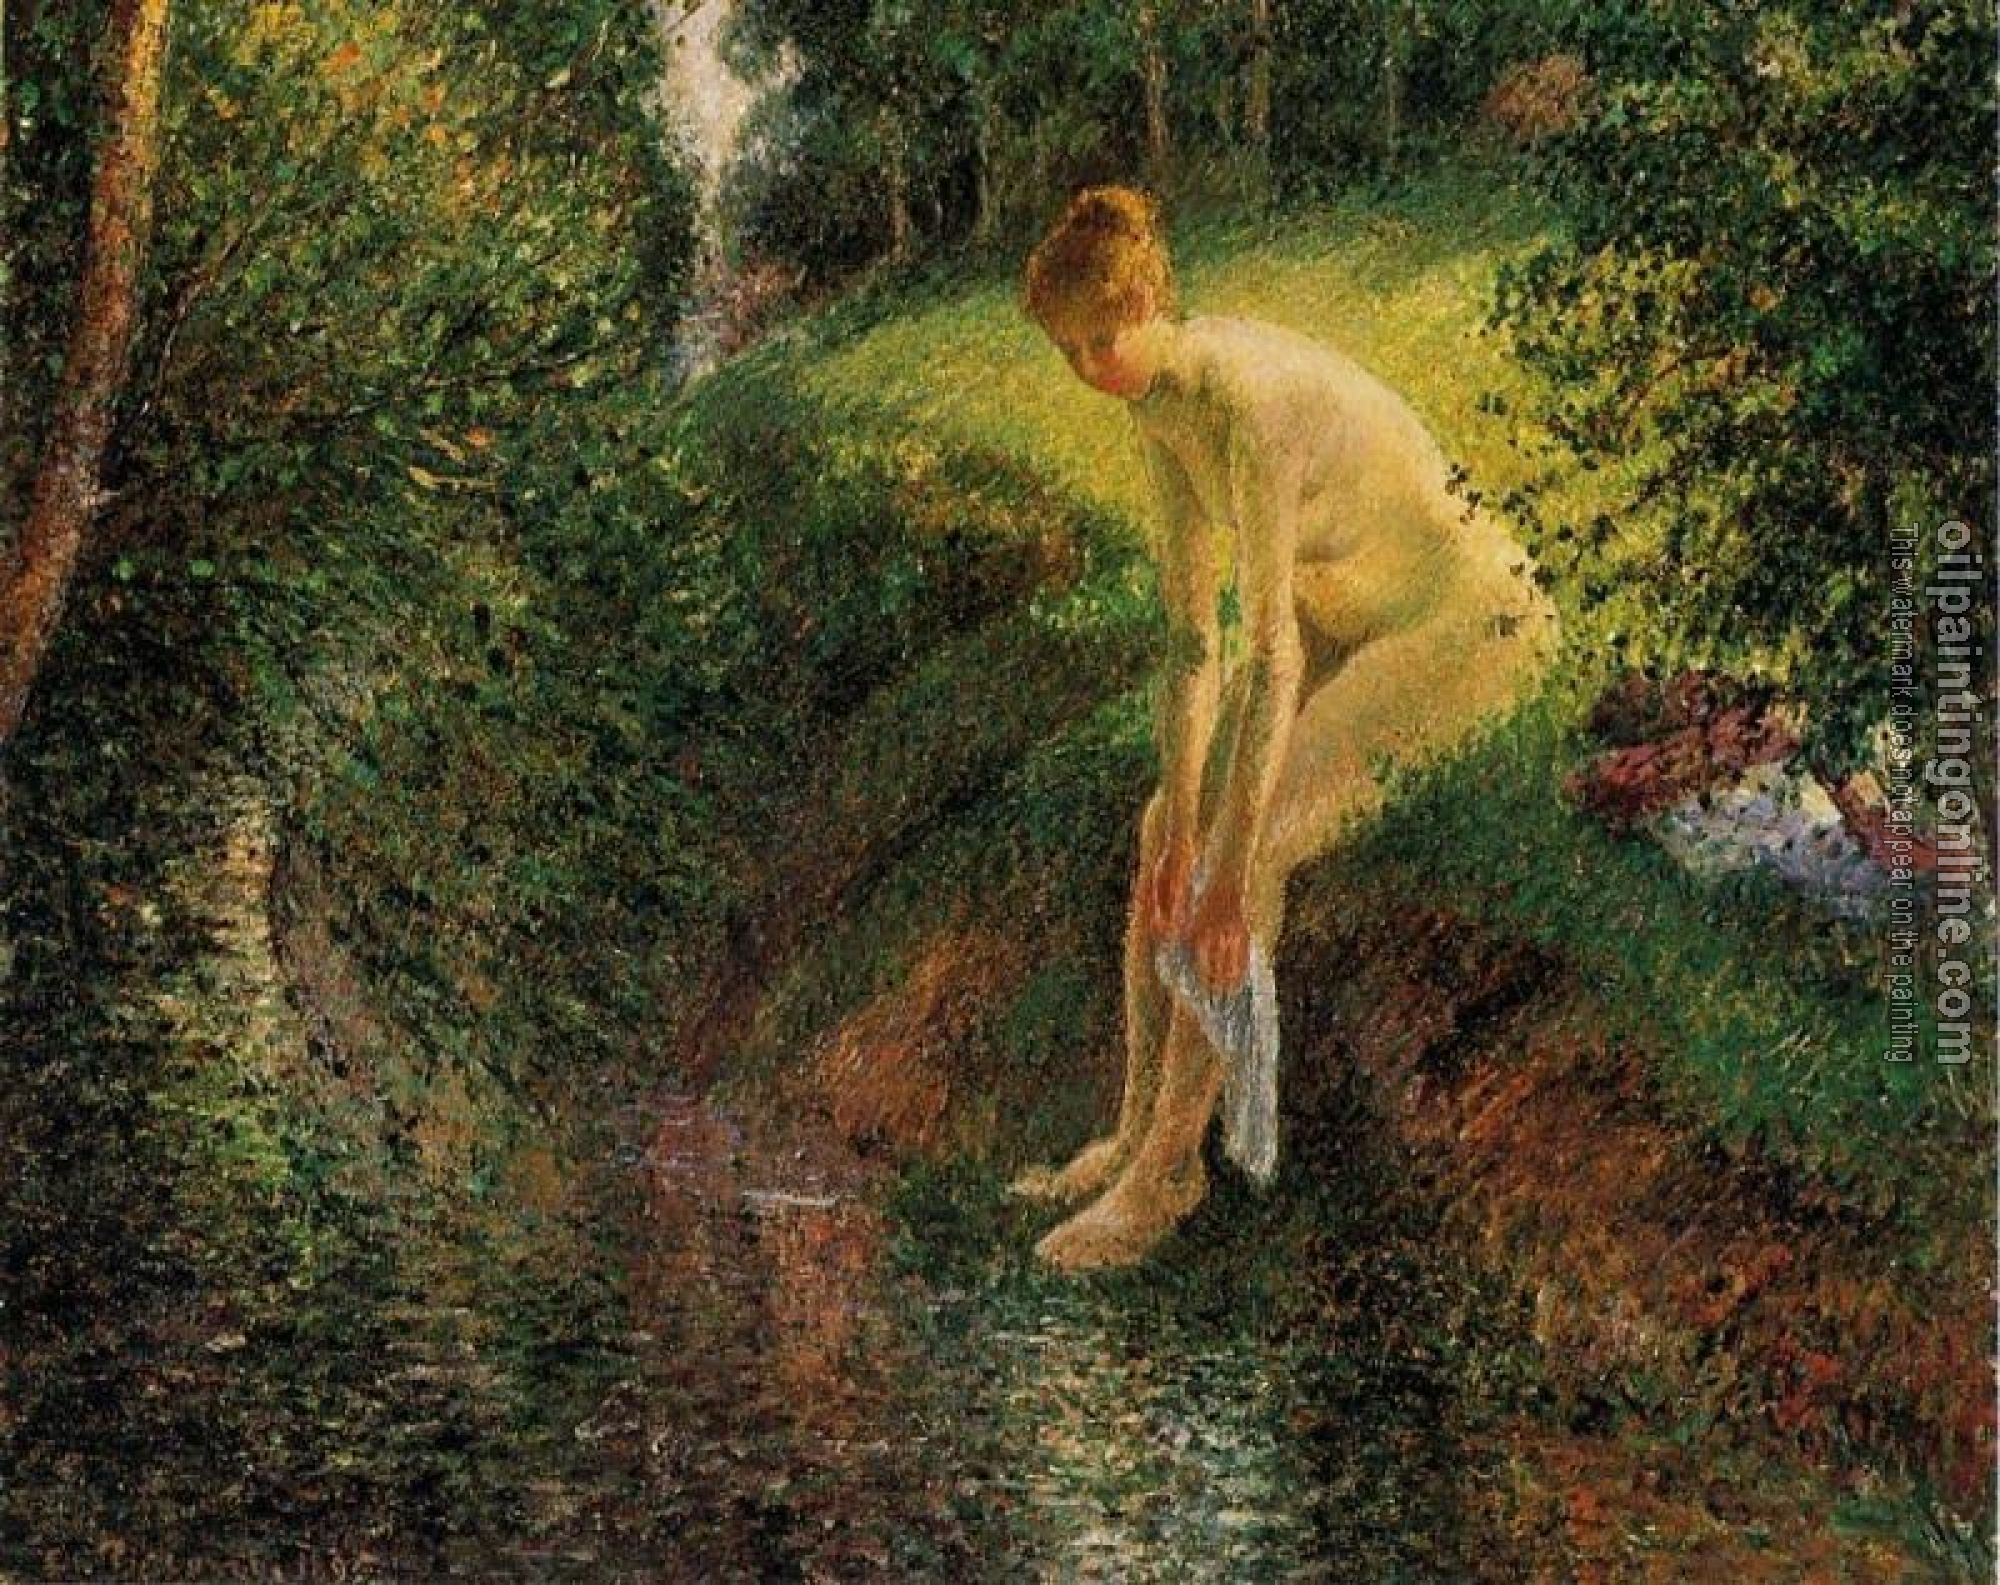 Pissarro, Camille - Bather in the Woods